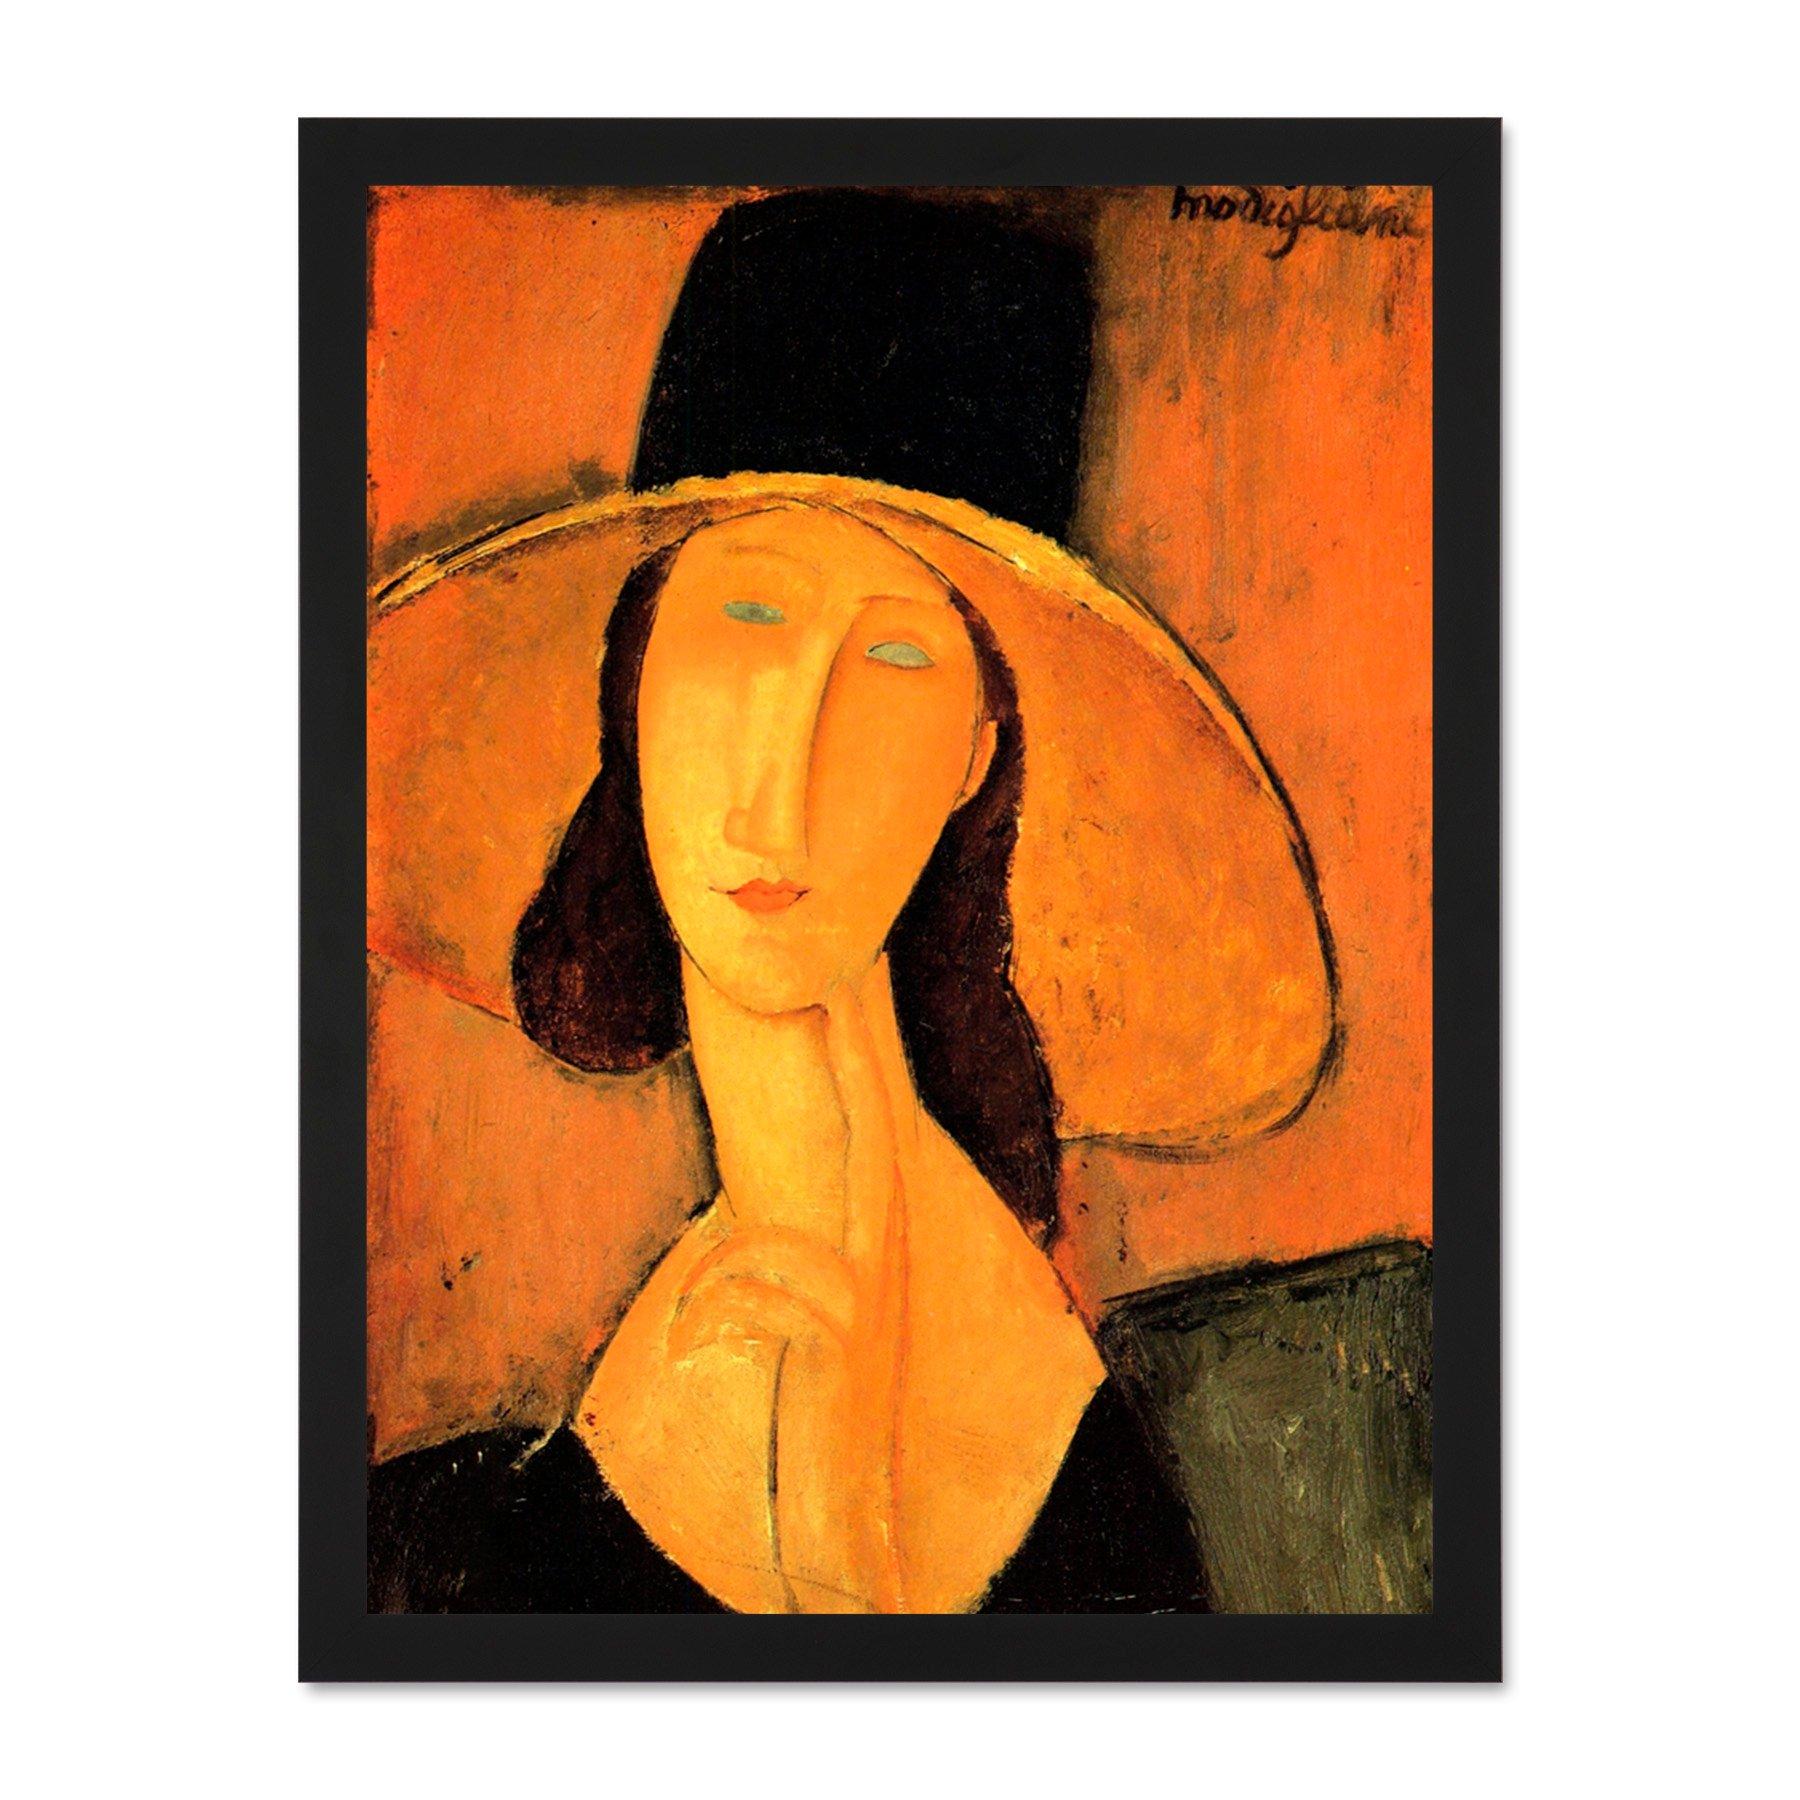 Amedeo Modigliani Portrait Of A Woman With Hat Old Large Framed Wall Decor Art Print